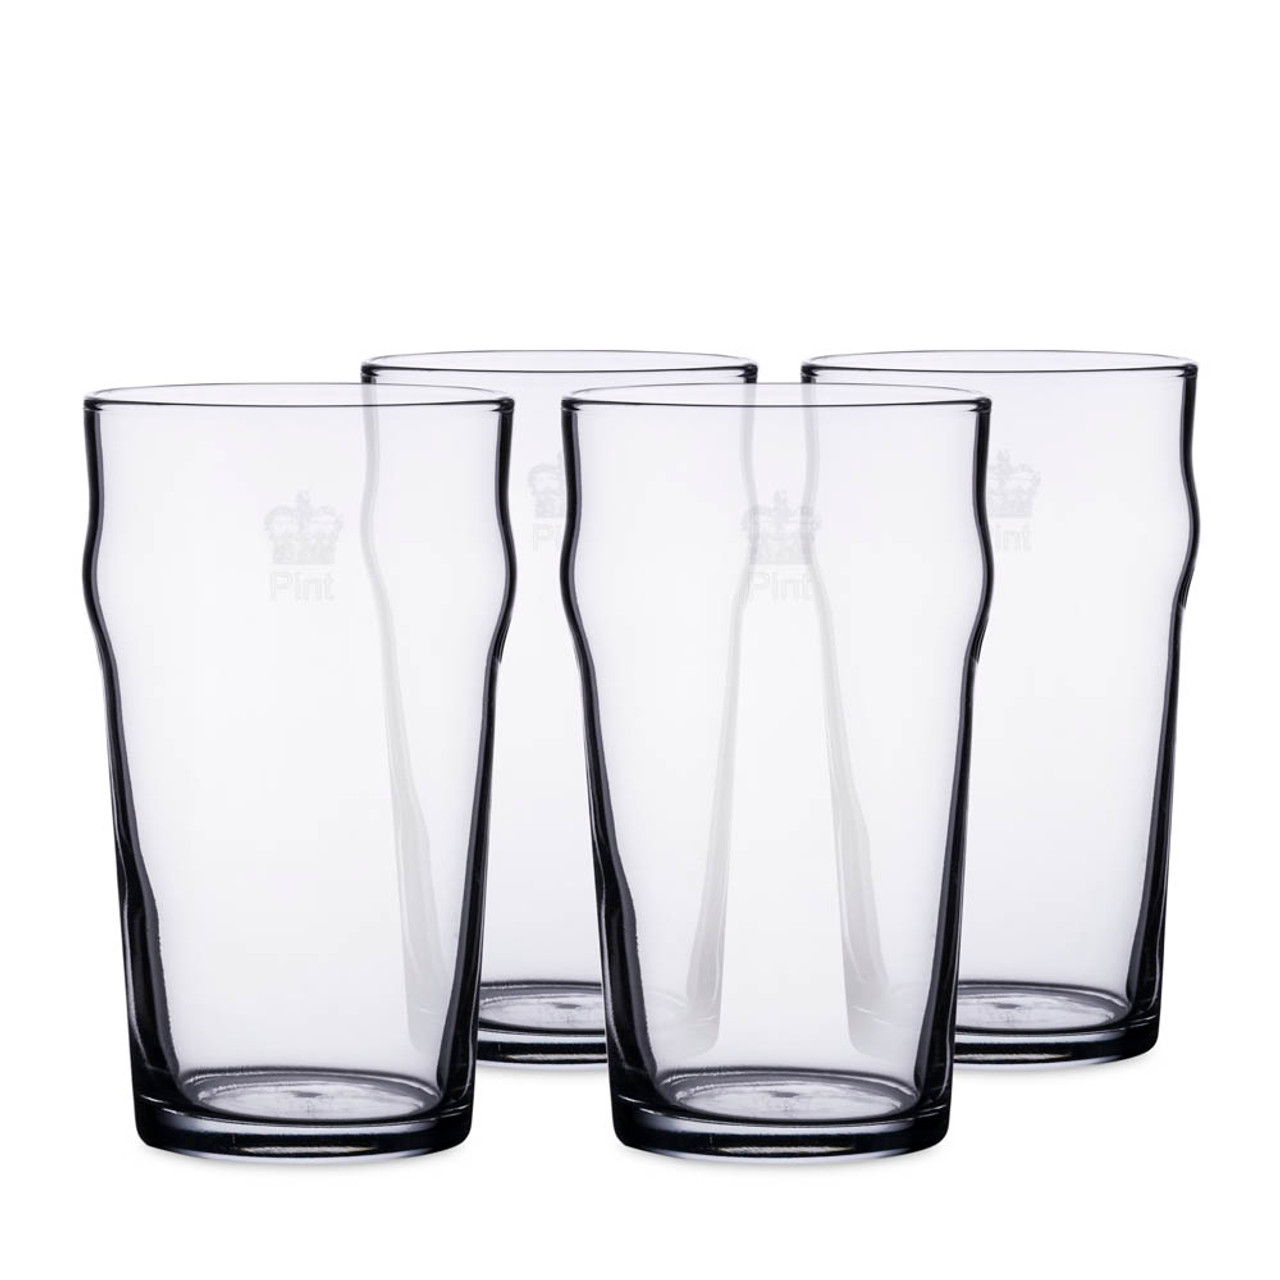 Mix or Match Pint Glasses Beer Glasses Set of 6 Gifts for 